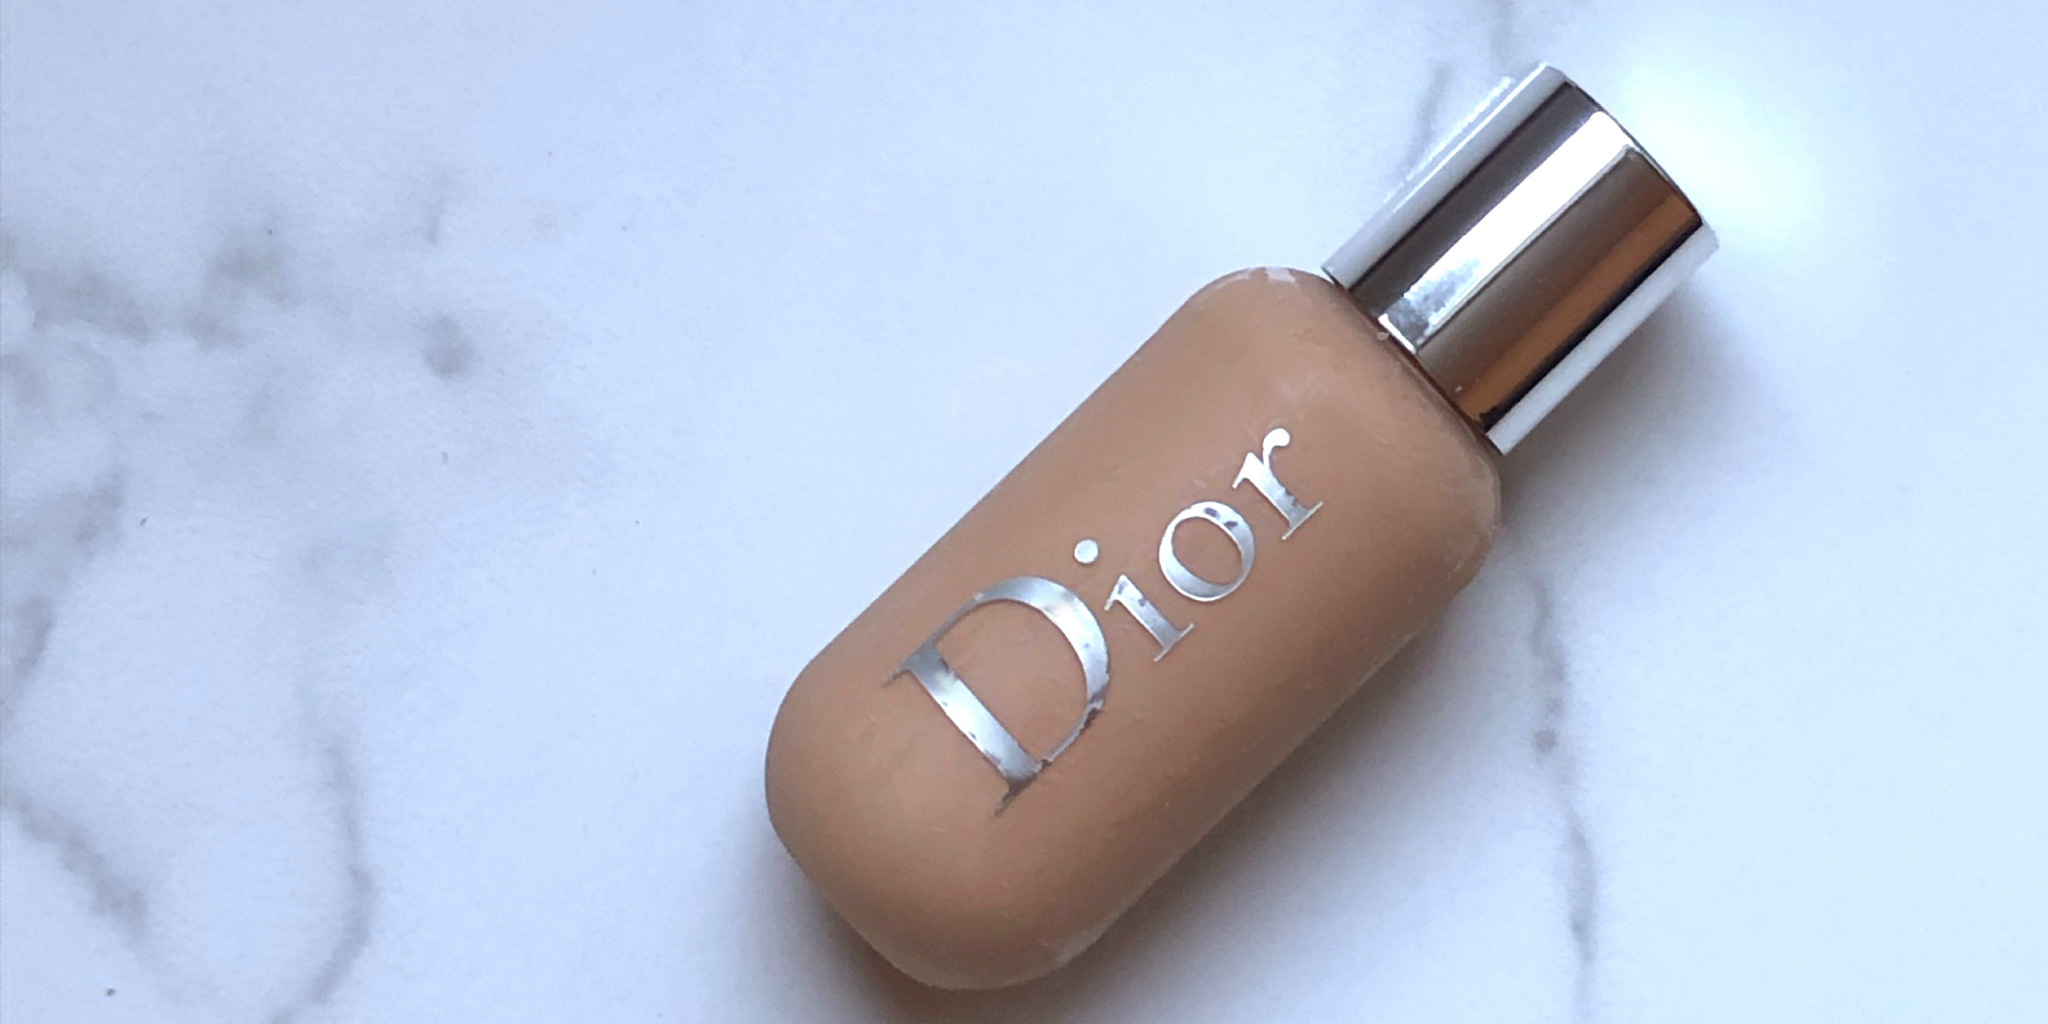 dior face and body ingredients